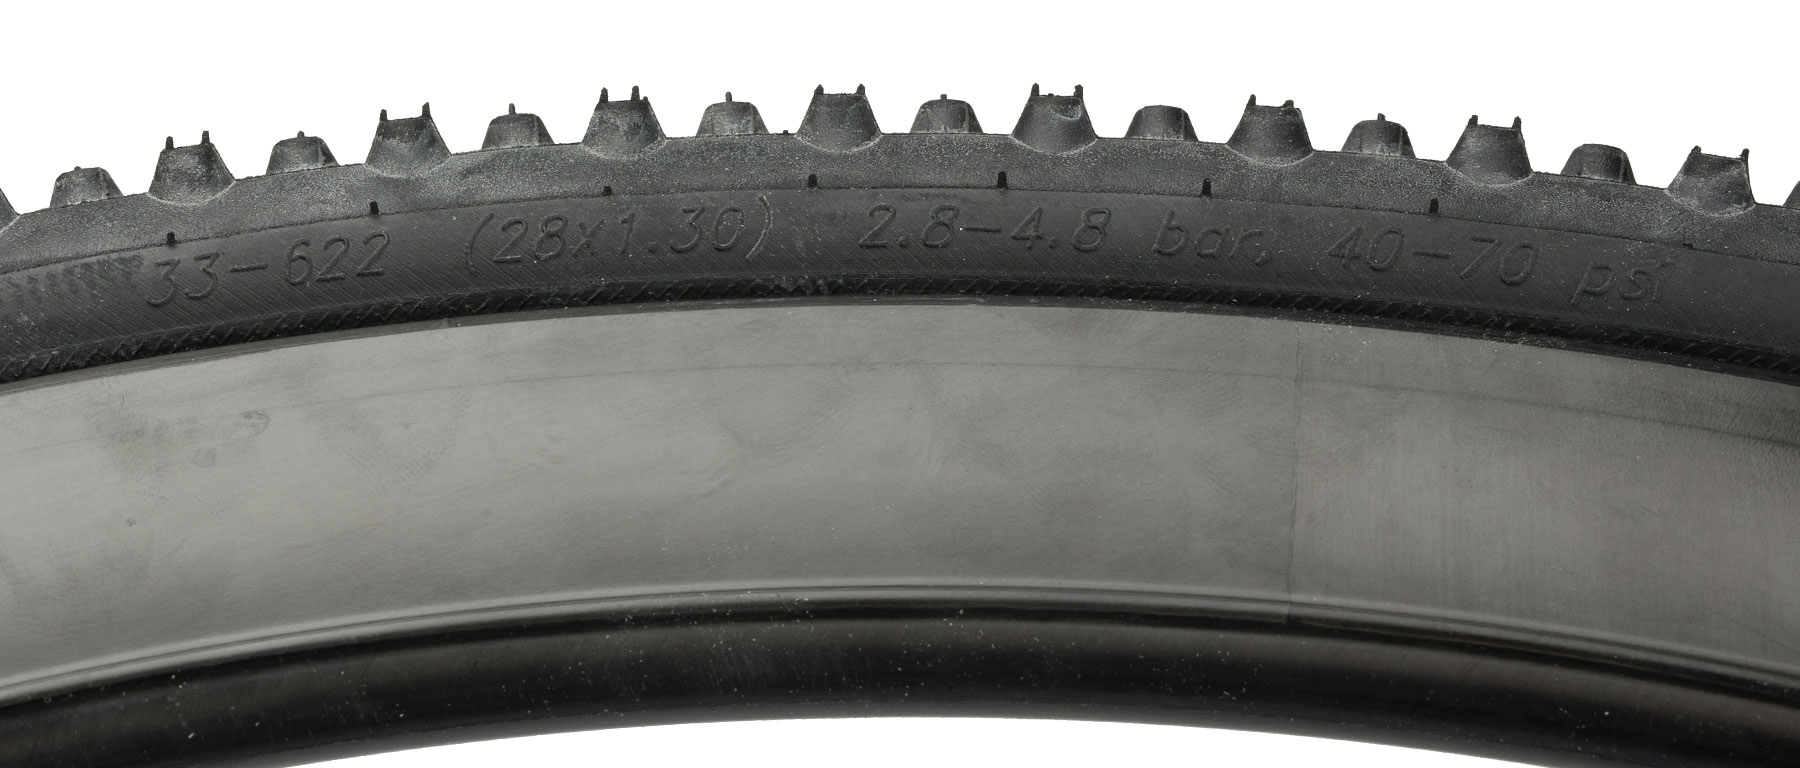 Schwalbe X-One Bite Tubeless Cyclocross Tire